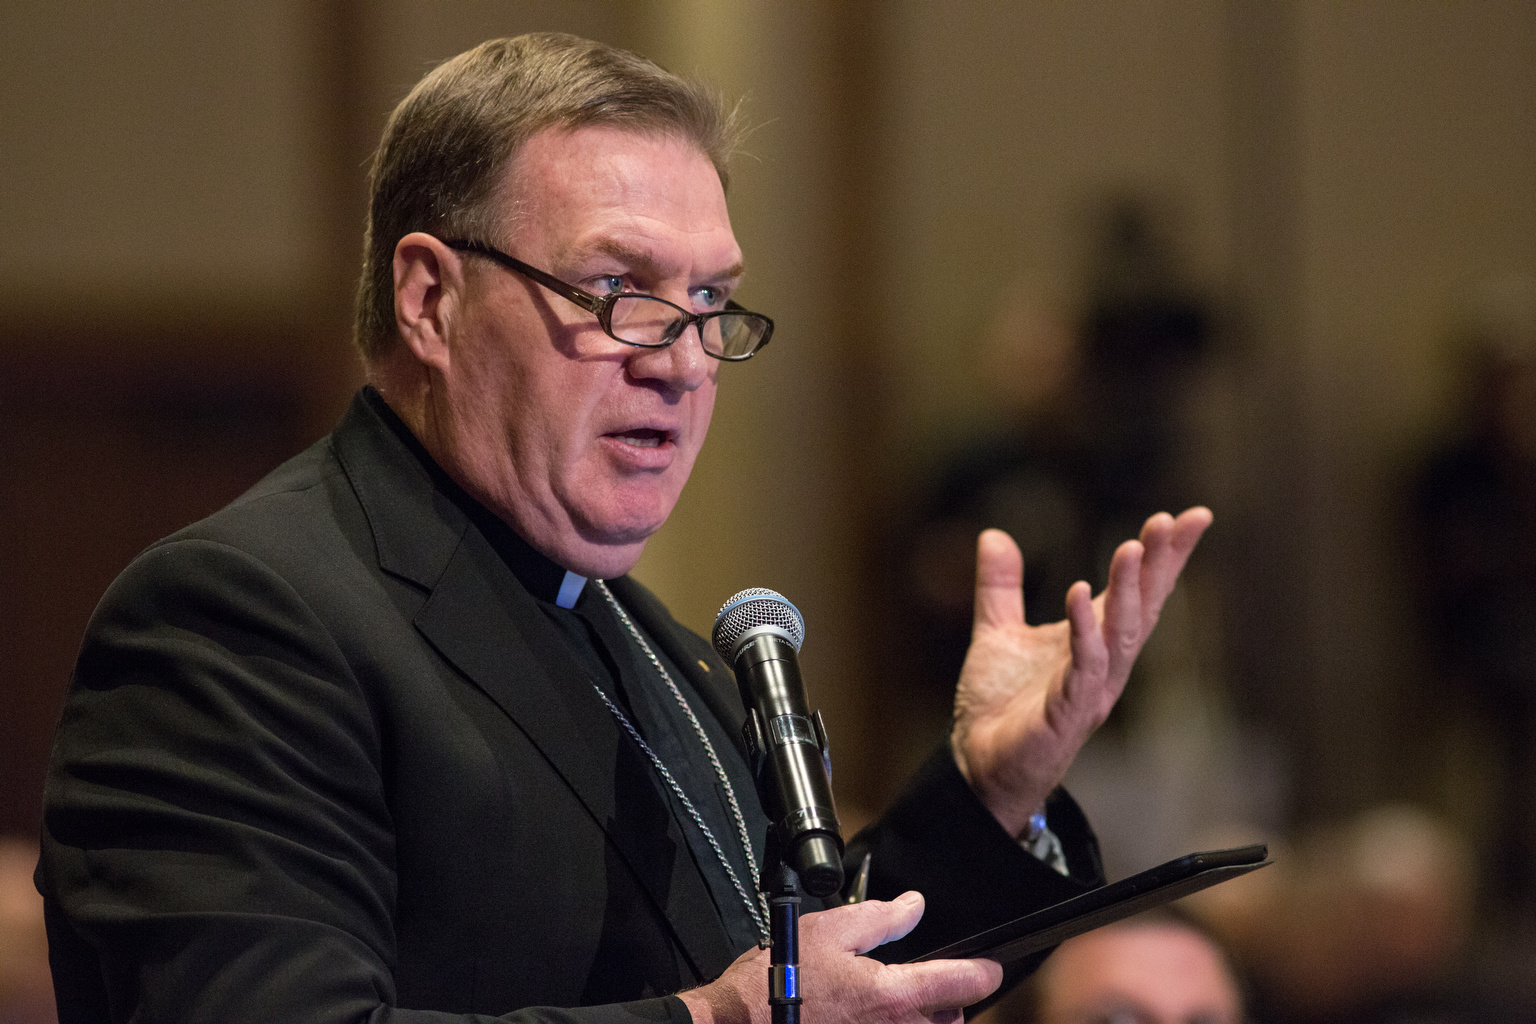 Archbishop Joseph Tobin of Indianapolis speaks Thursday during the spring general assembly of the U.S. Conference of Catholic Bishops in St. Louis. (CNS/St. Louis Review/Lisa Johnston)